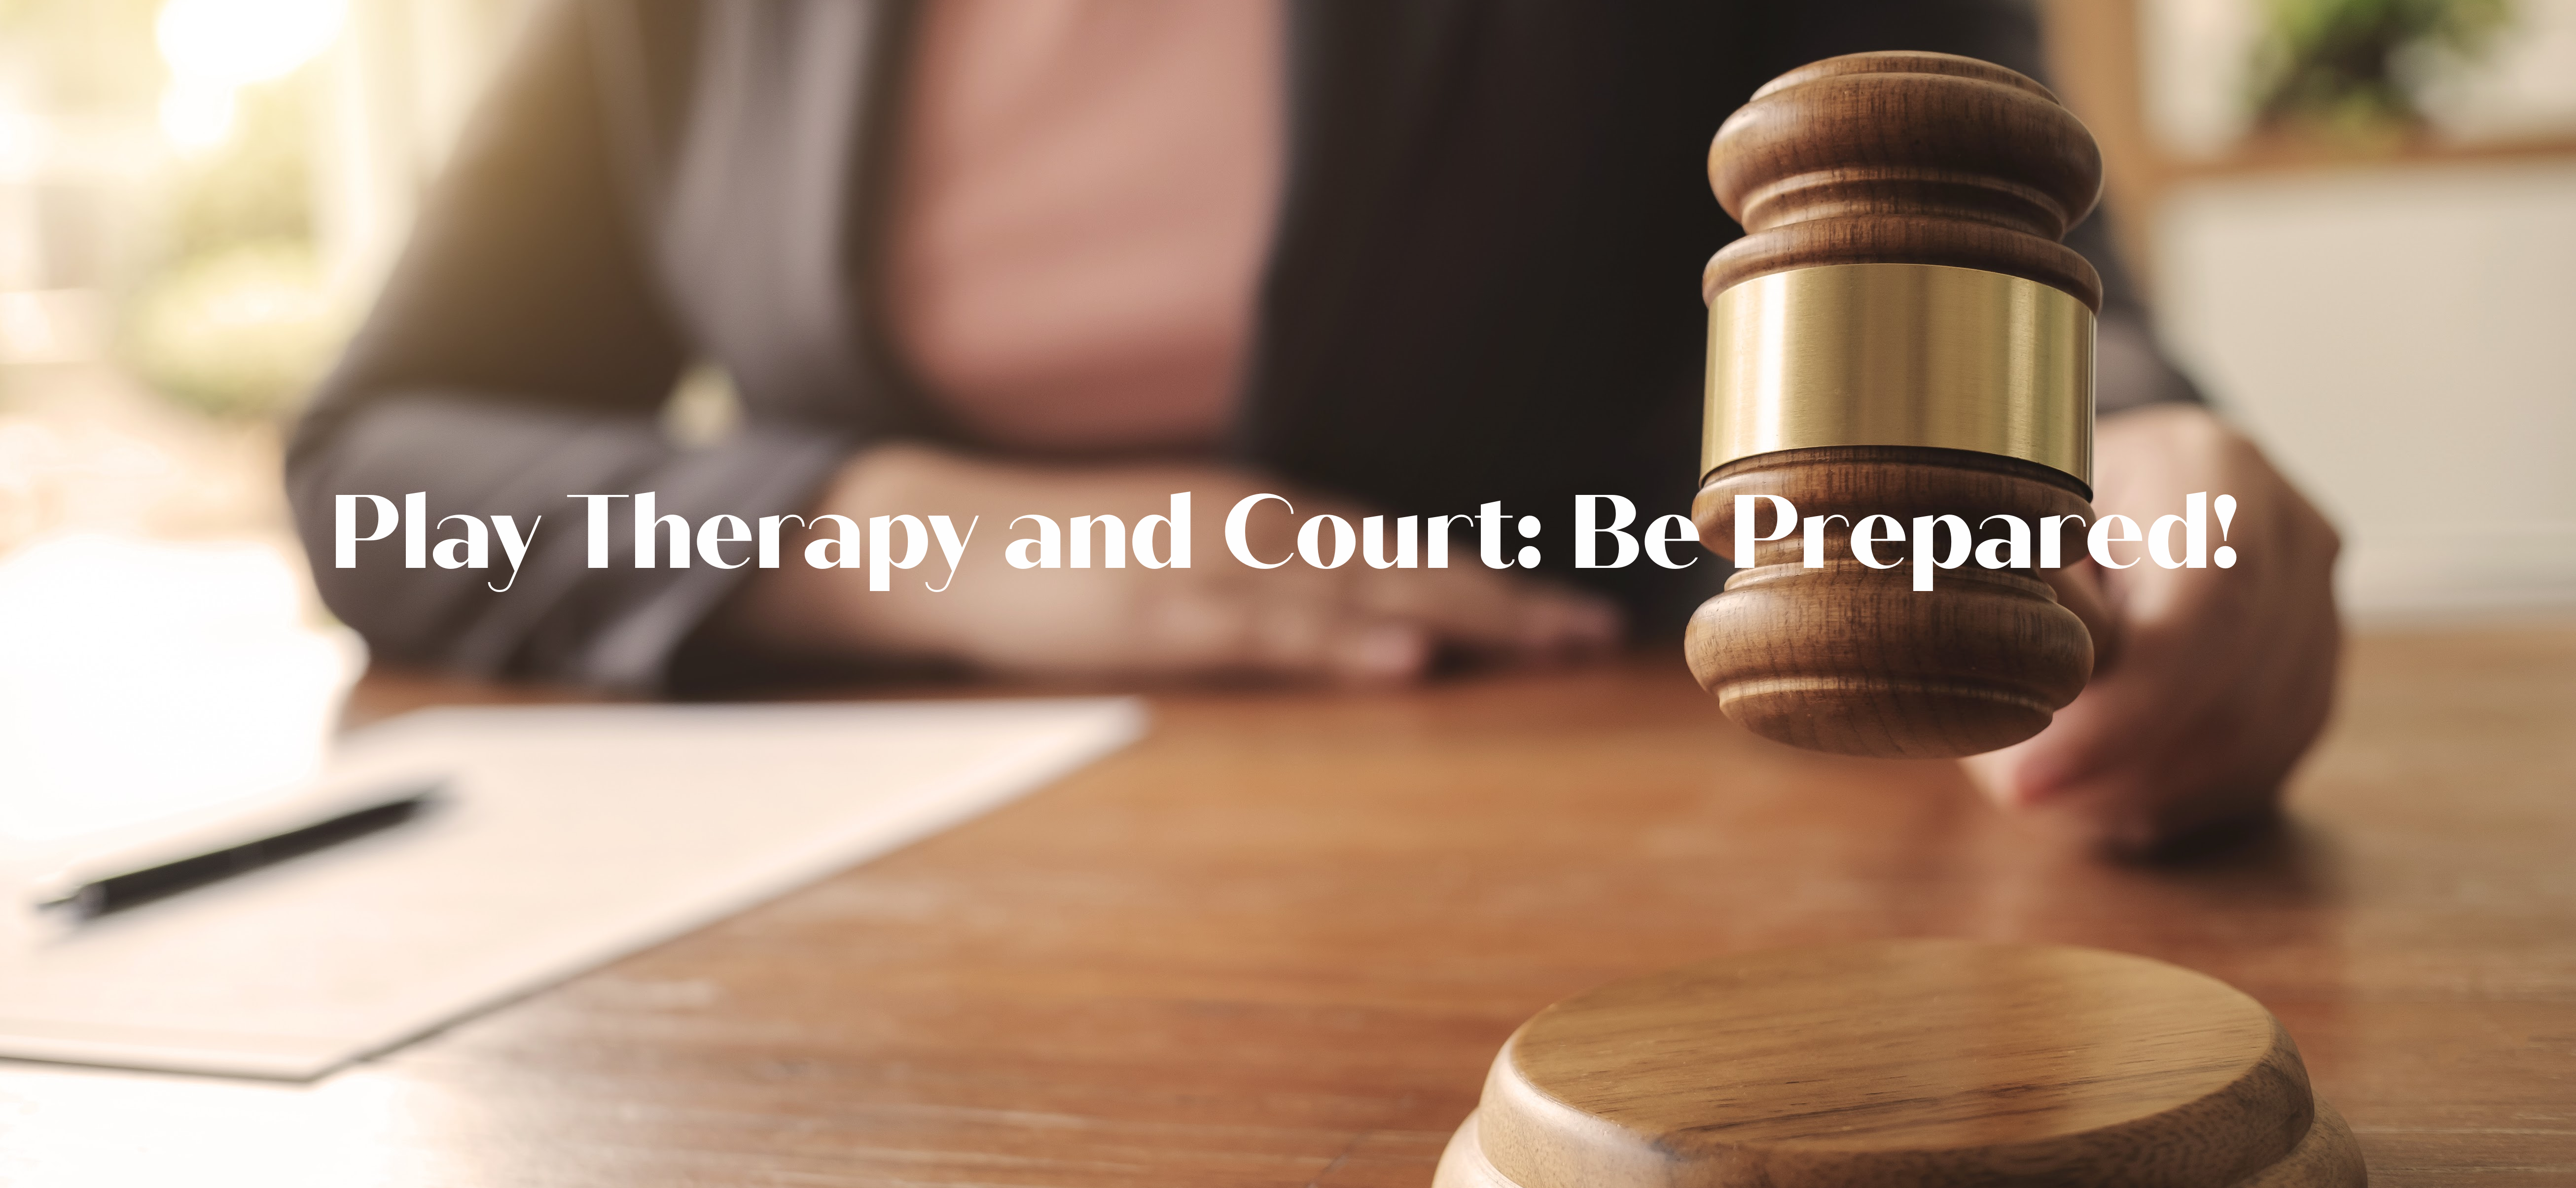 play therapy and court